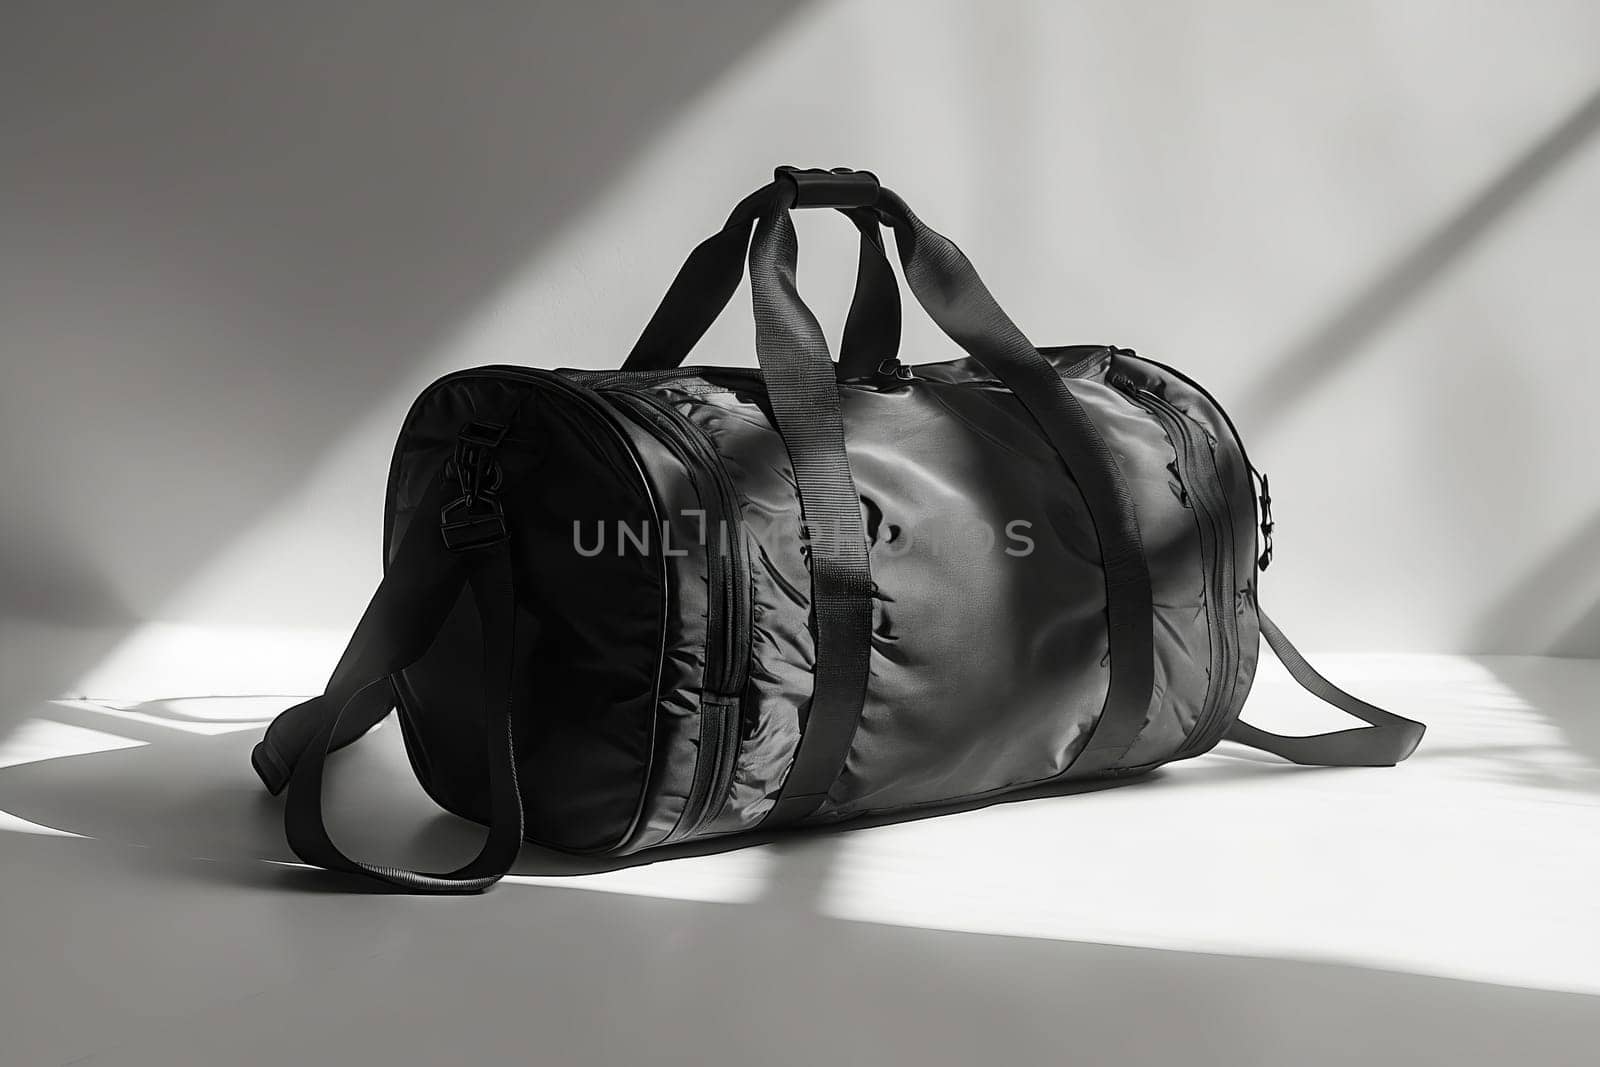 A black duffle bag sits on a white surface. The bag is large and has a black strap. Concept of travel and adventure, as the bag is likely used for carrying belongings during a trip. Generative AI